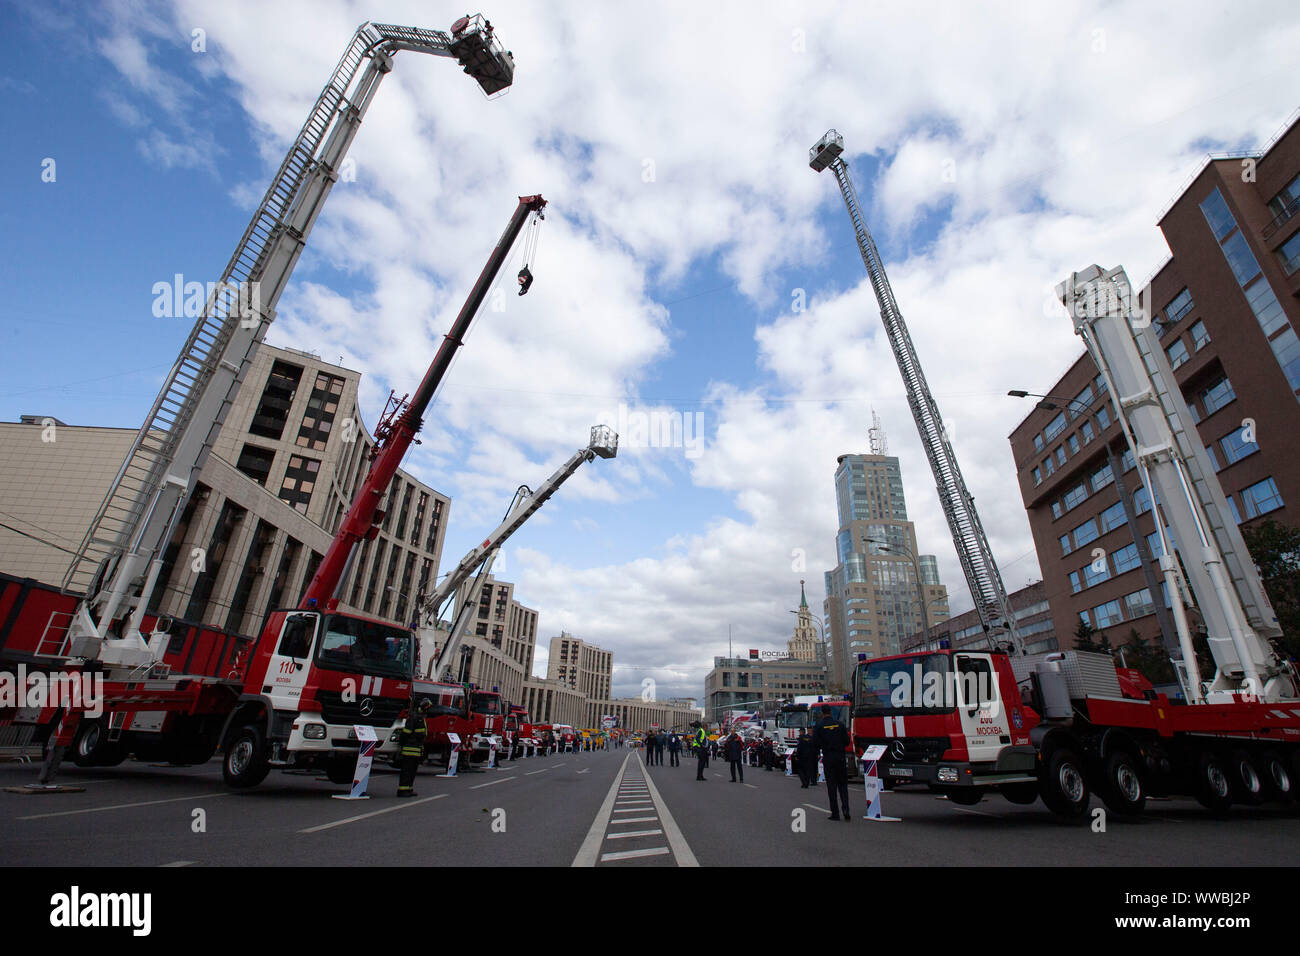 Moscow, Russia. 14th Sep, 2019. Fire engines are seen on display in central Moscow, Russia, on Sept. 14, 2019. About 700 vehicles took part in the Municipal Service Vehicle Parade on Saturday. Credit: Alexander Zemlianichenko Jr/Xinhua Stock Photo